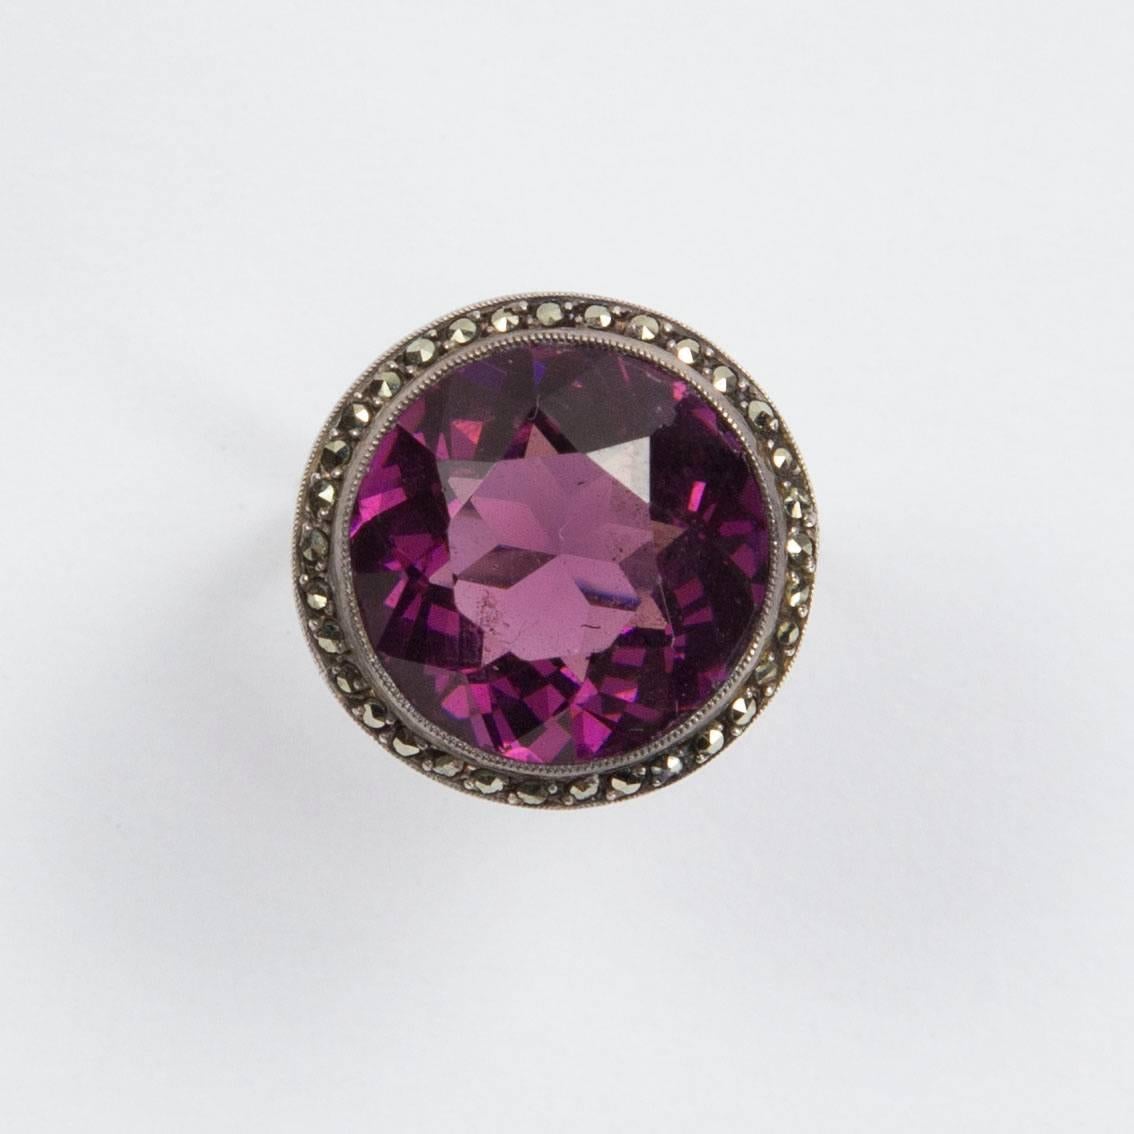 Fabulous Solitaire Ring set with a large round facet-cut faux Amethyst measuring approx. 16mm; surrounded by genuine Marcasite stones; beautifully hand crafted Sterling Silver mounting; Size 7.25; we offer complimentary ring re-sizing; Vintage Art